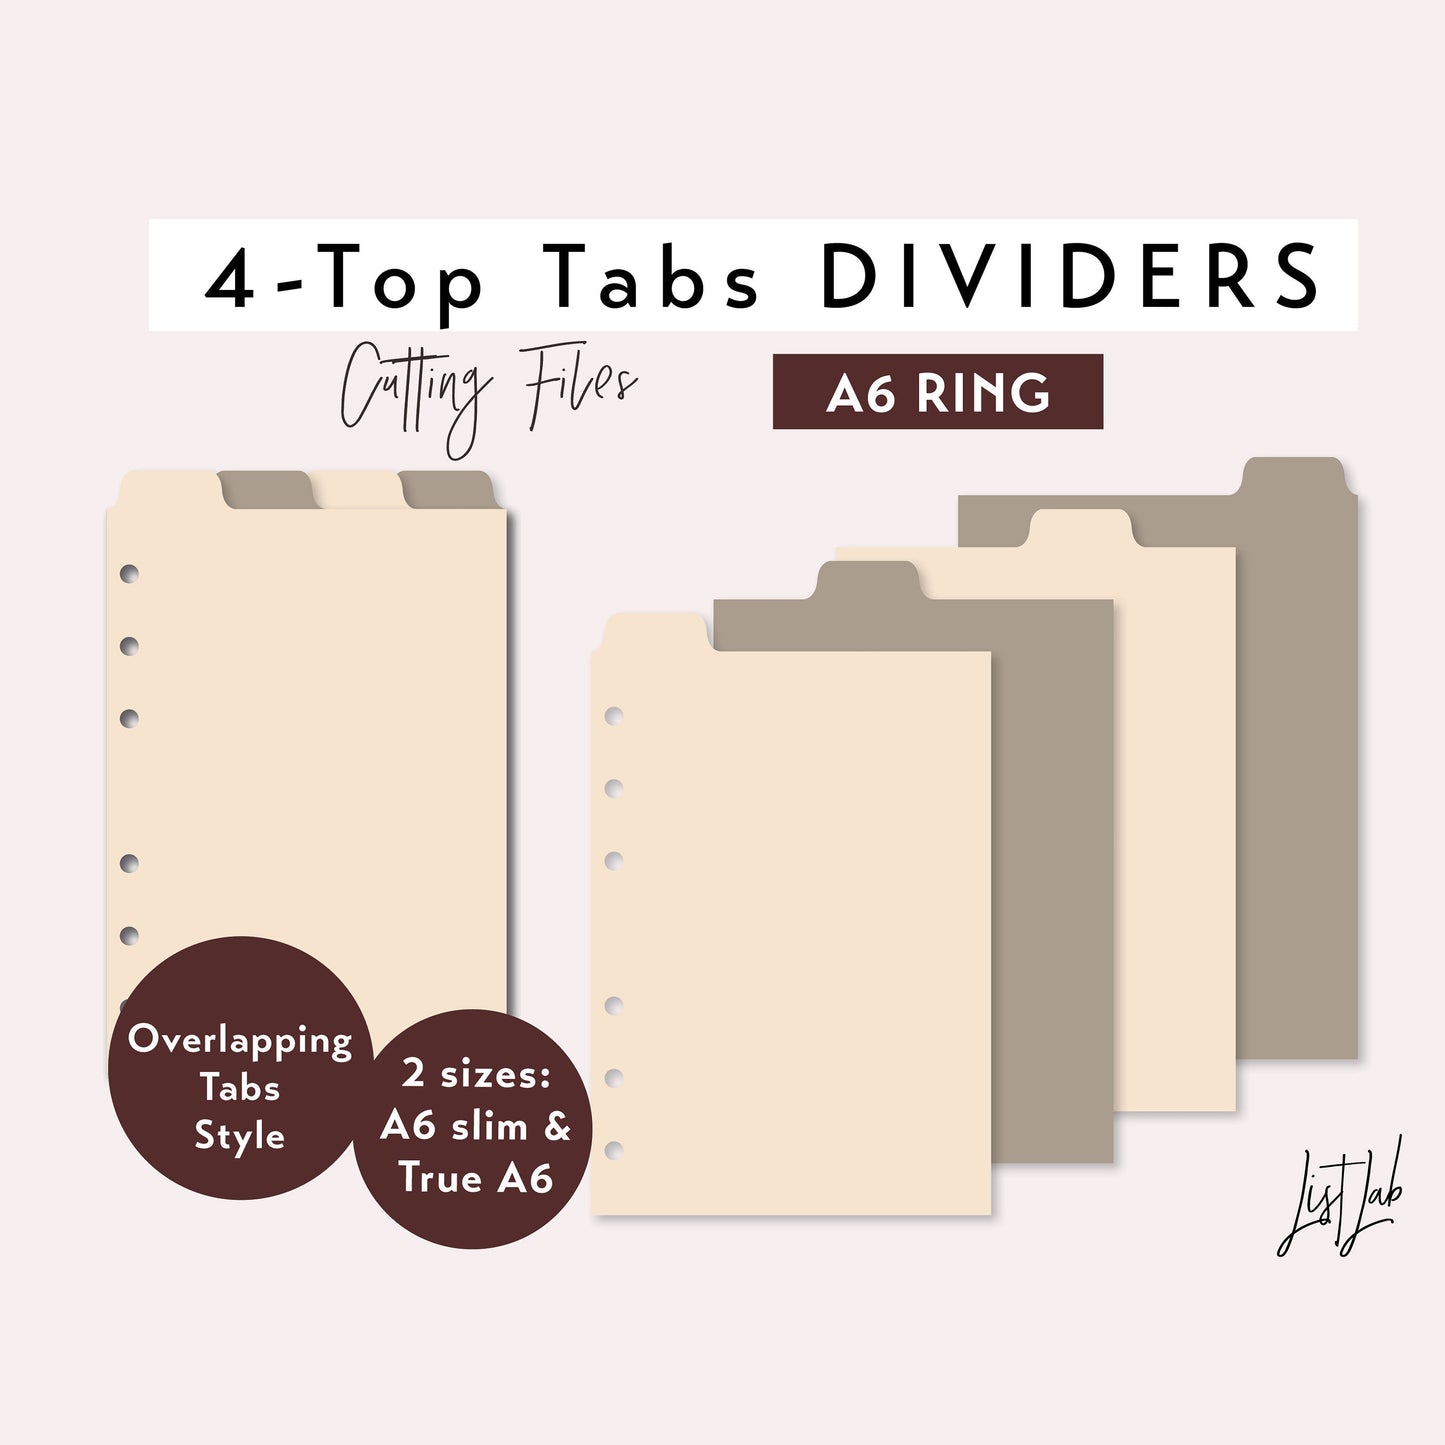 A6 Ring 4-TOP Tab Dividers Cutting Files Set